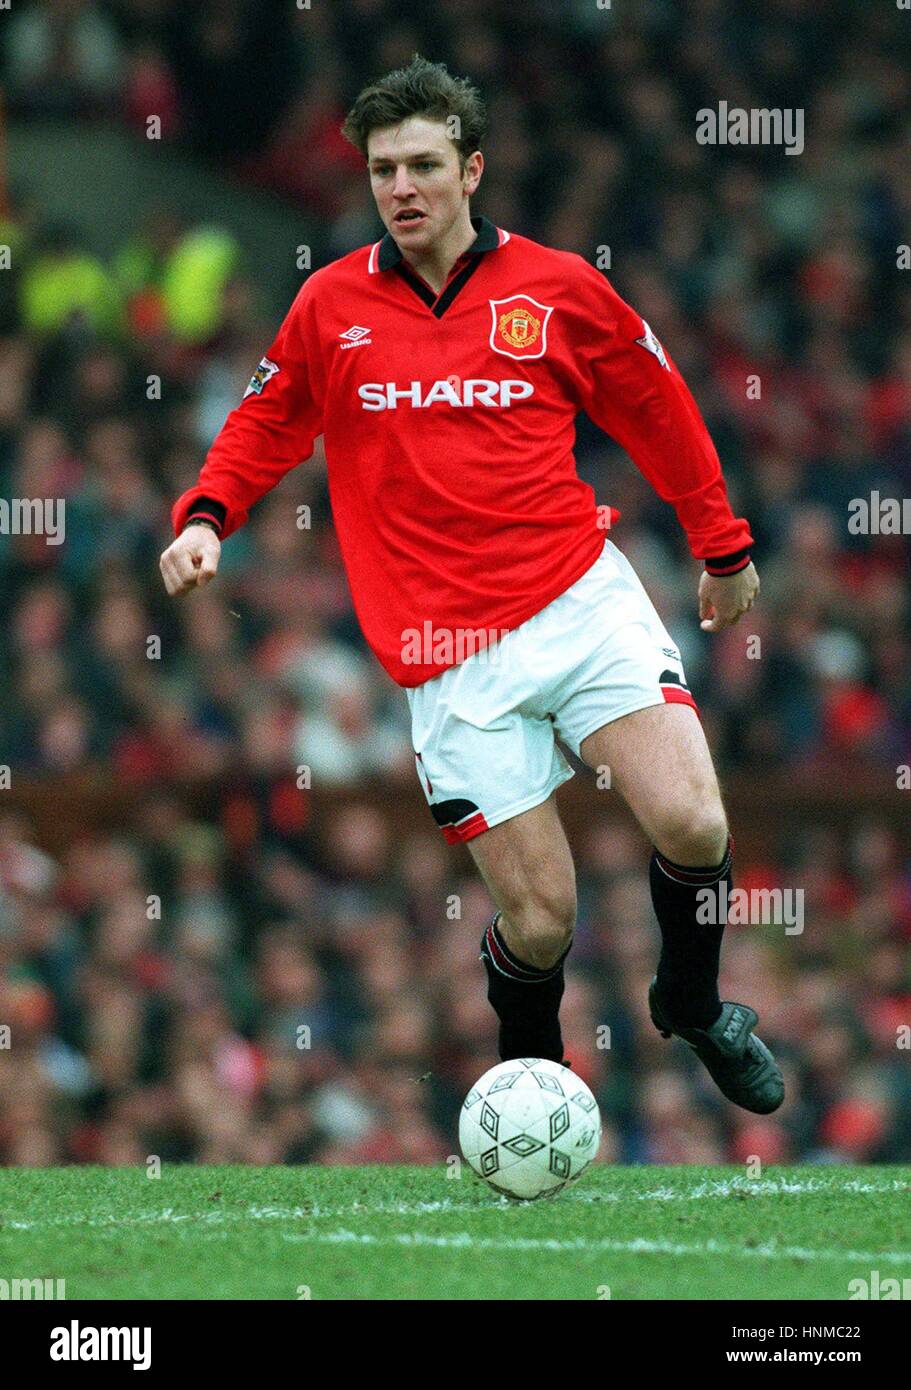 LEE SHARPE MANCHESTER UNITED FC 06 March 1995 Stock Photo - Alamy